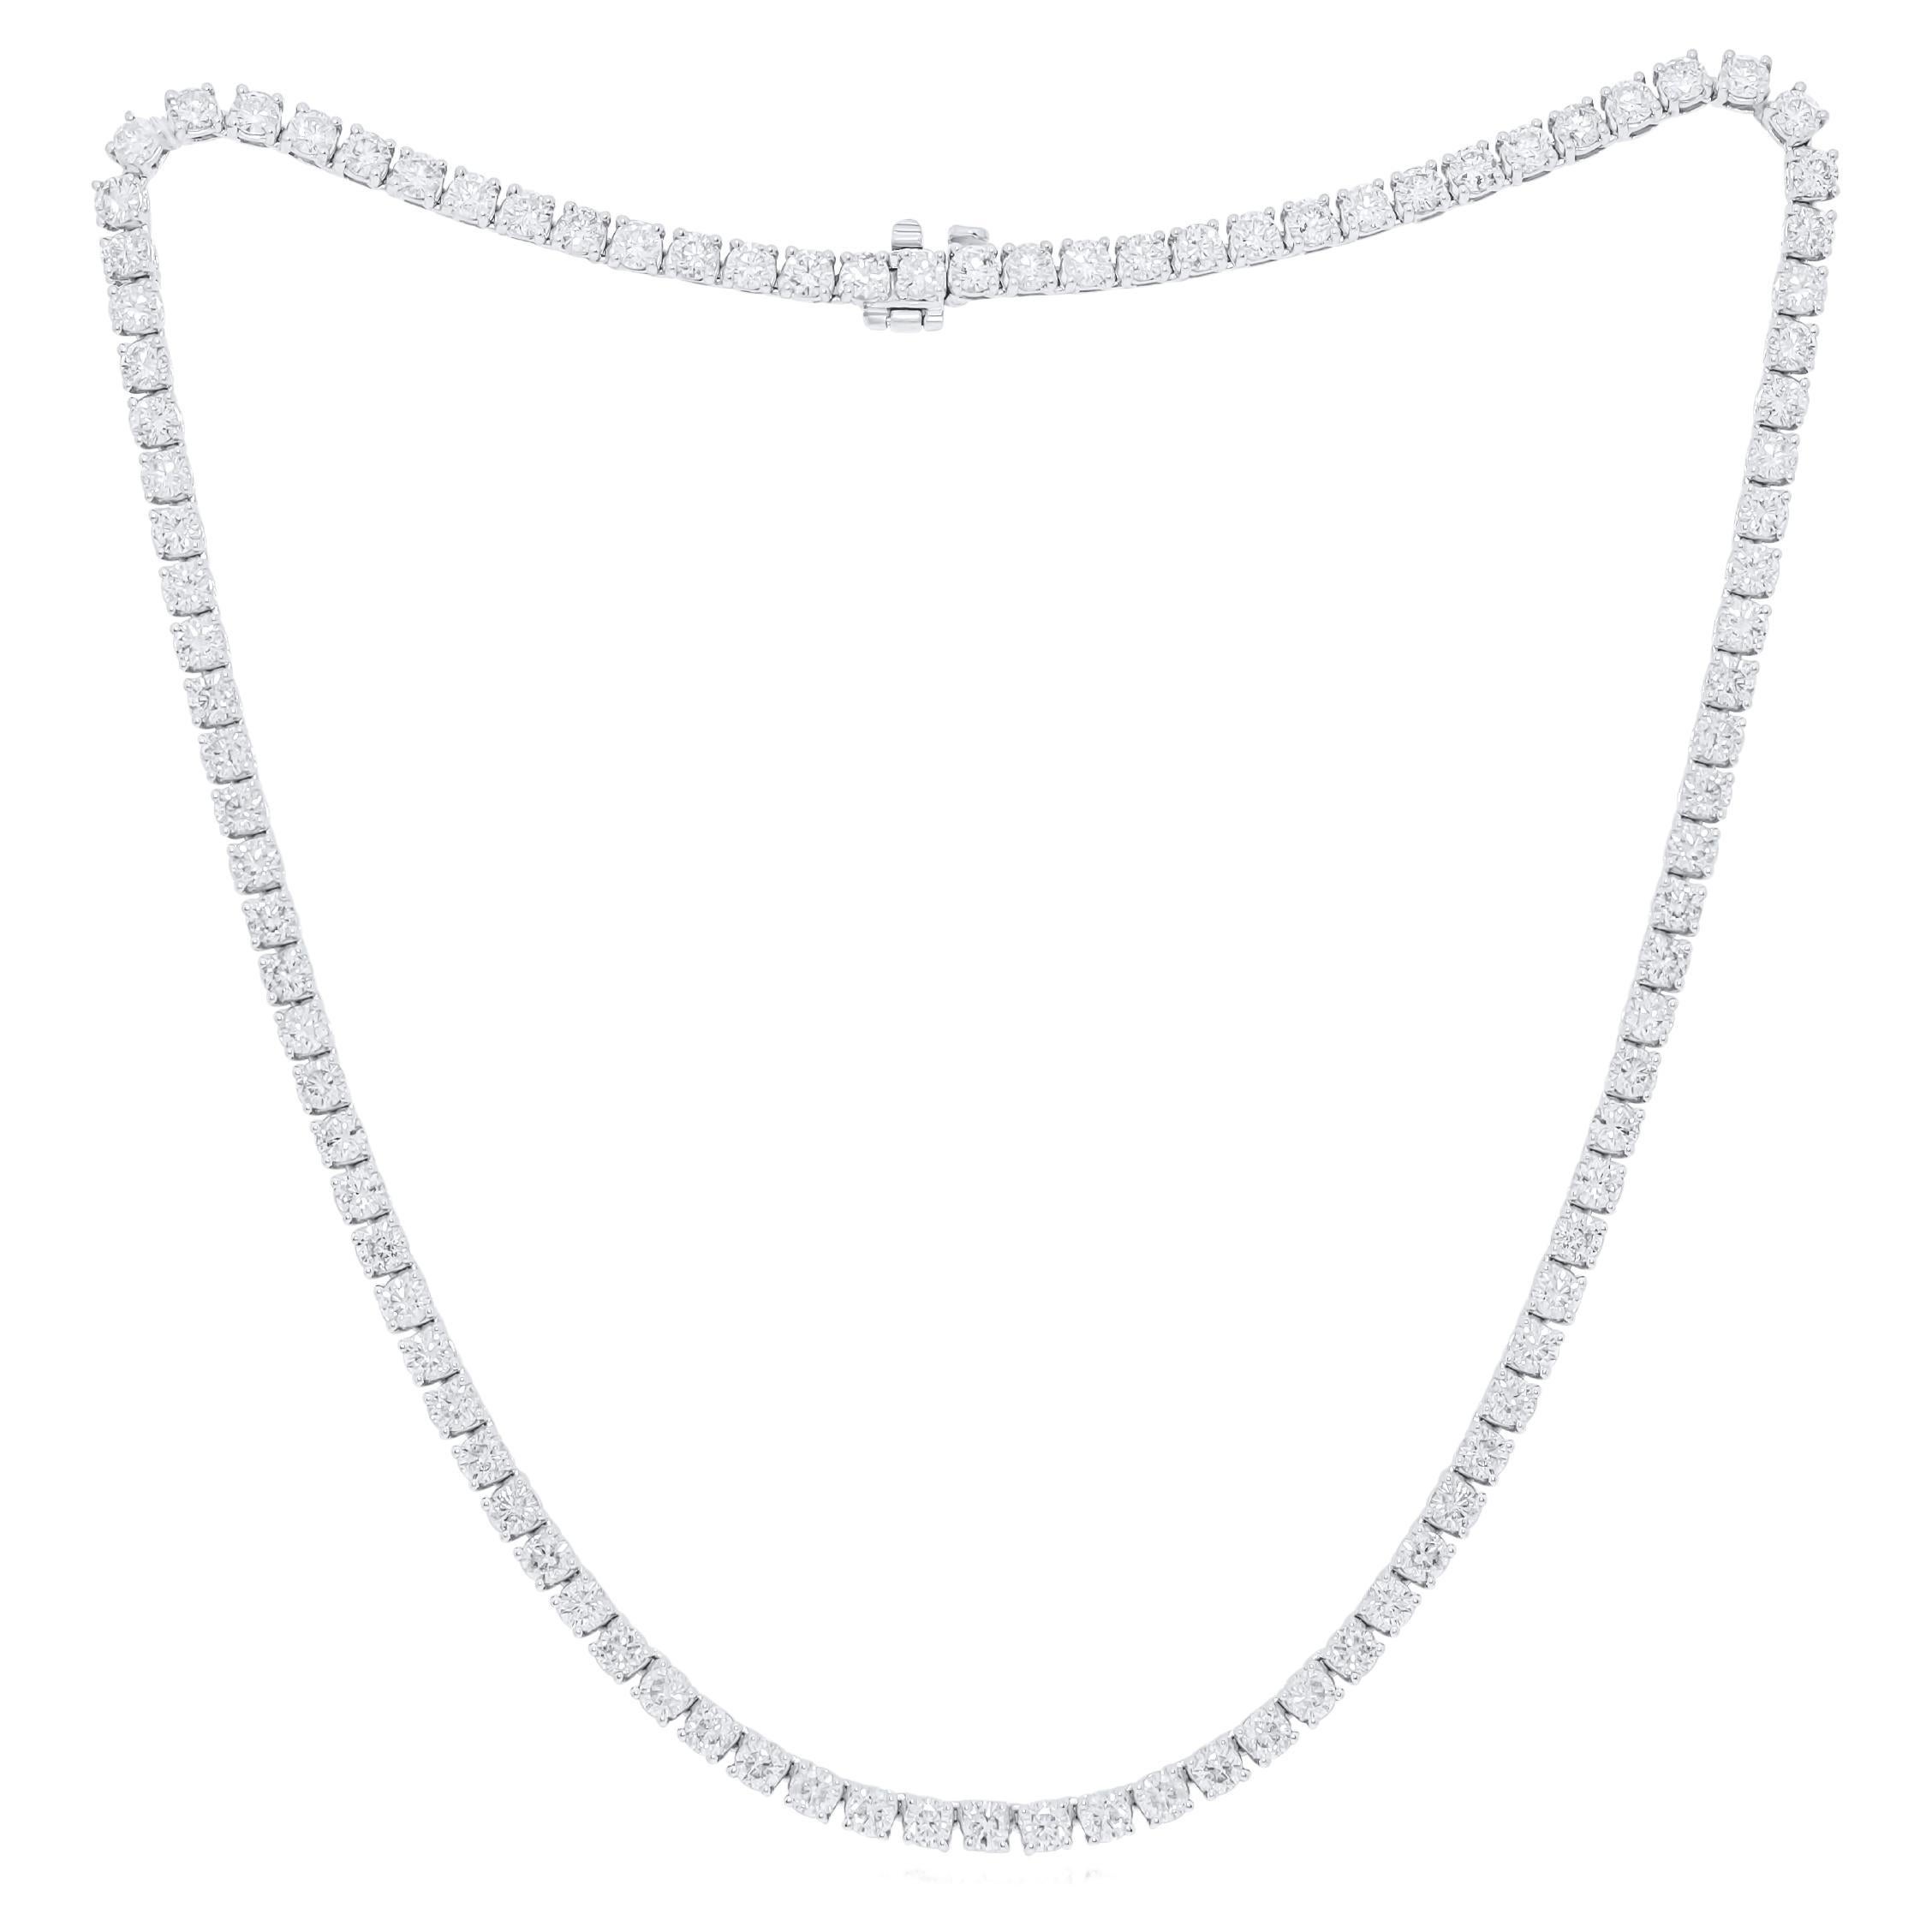 Diana M. Custom 27.55 cts Round 4 Prong Diamond 18k White Gold Tennis Necklace  For Sale